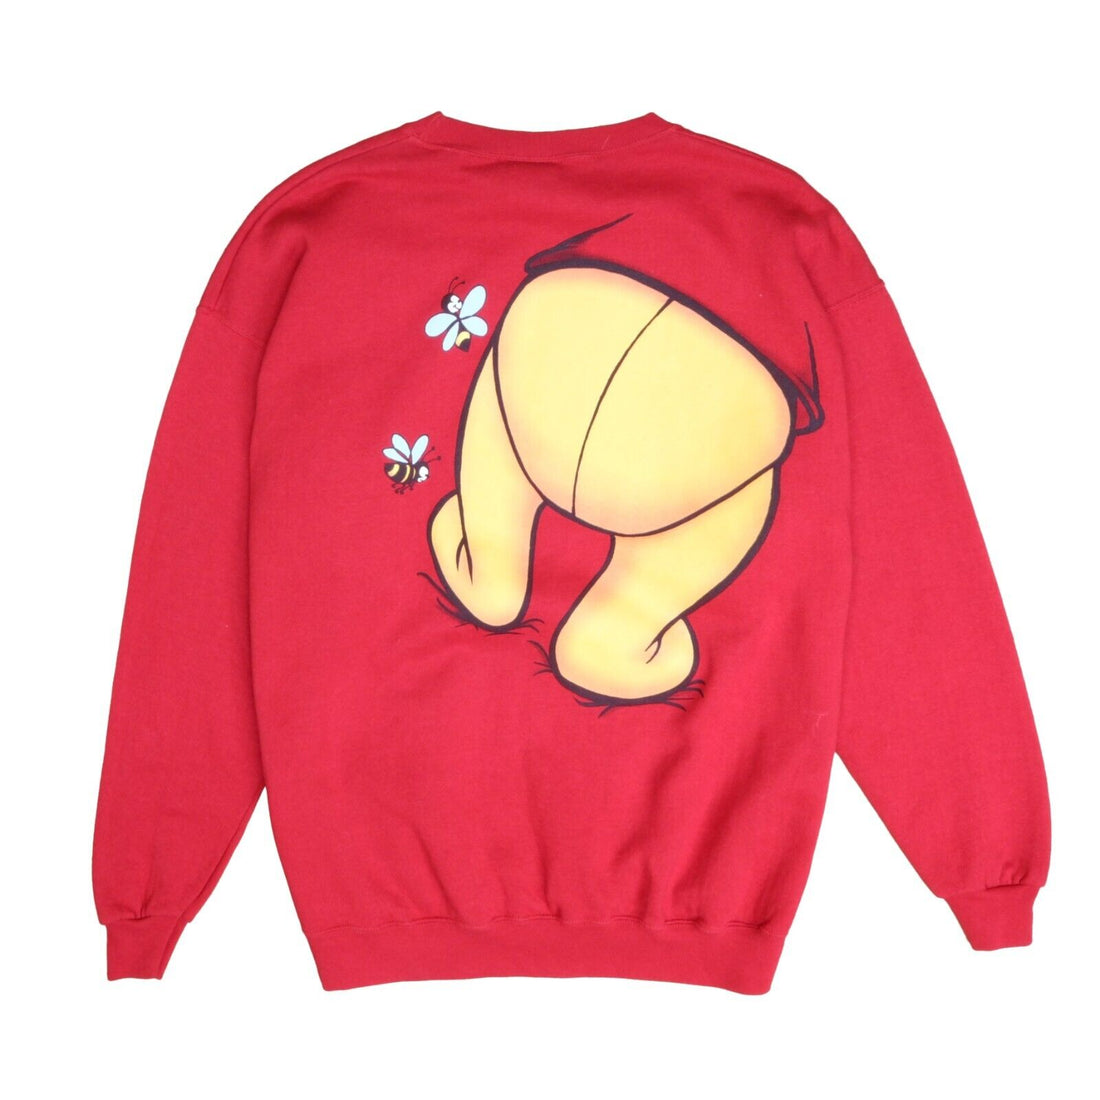 Vintage Winnie The Pooh Hunny Sweatshirt Crewneck Size 2XL Red Double Sided